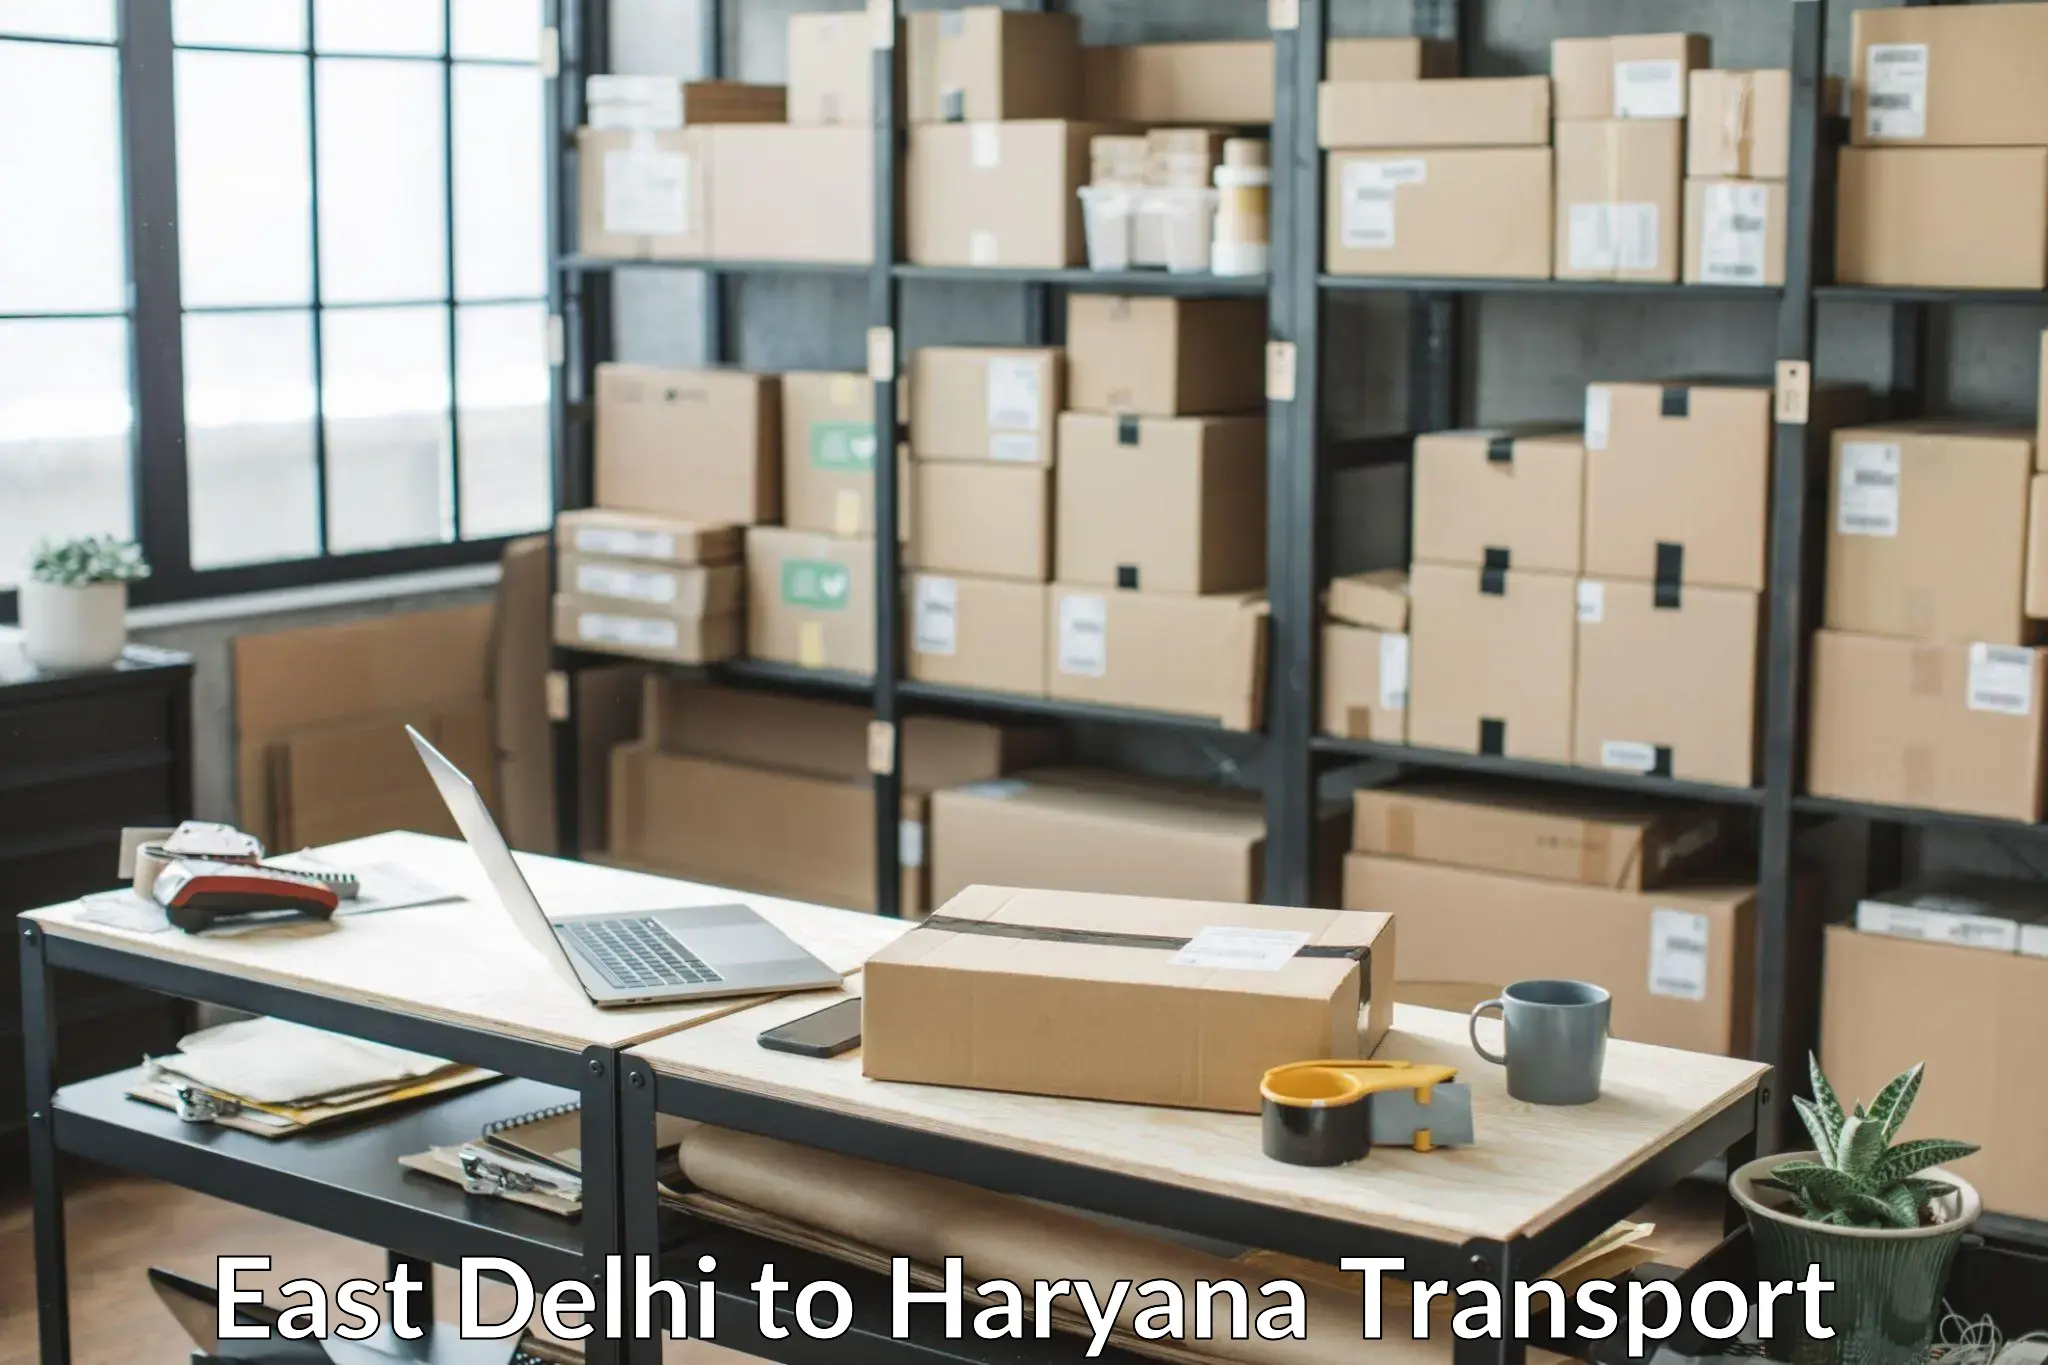 Truck transport companies in India in East Delhi to Dharuhera